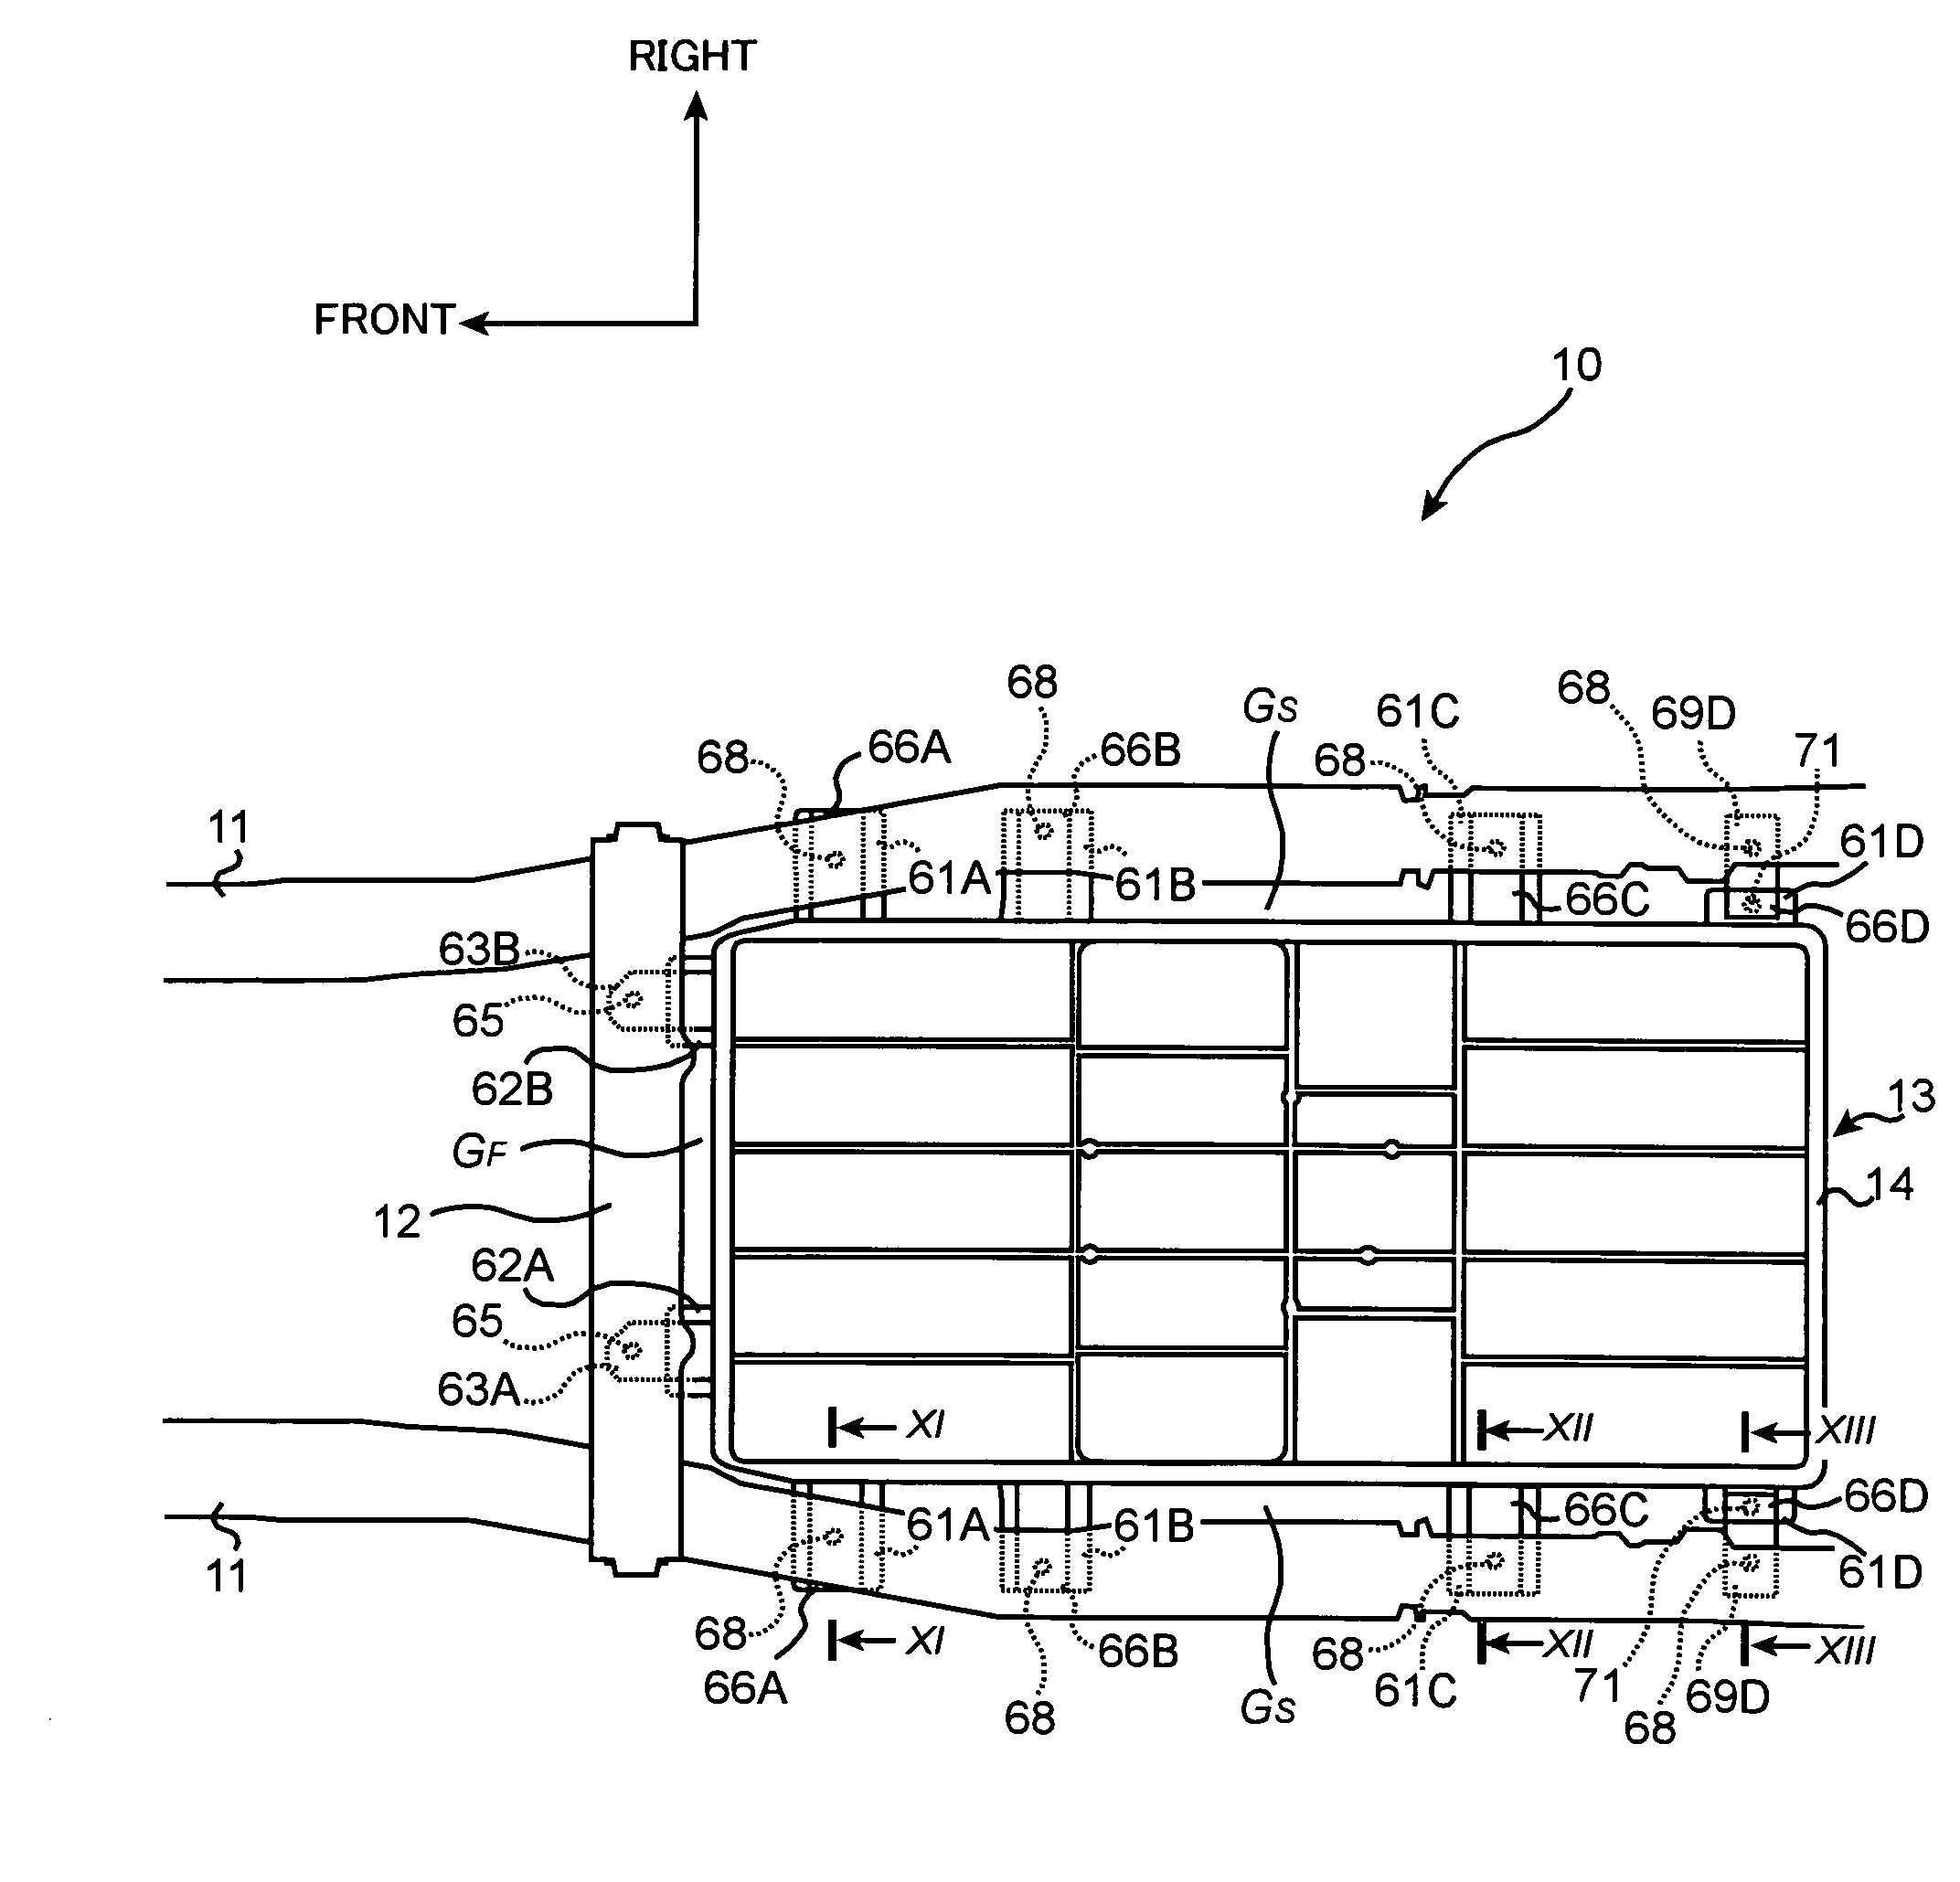 Structure for mounting batteries onto electric vehicles